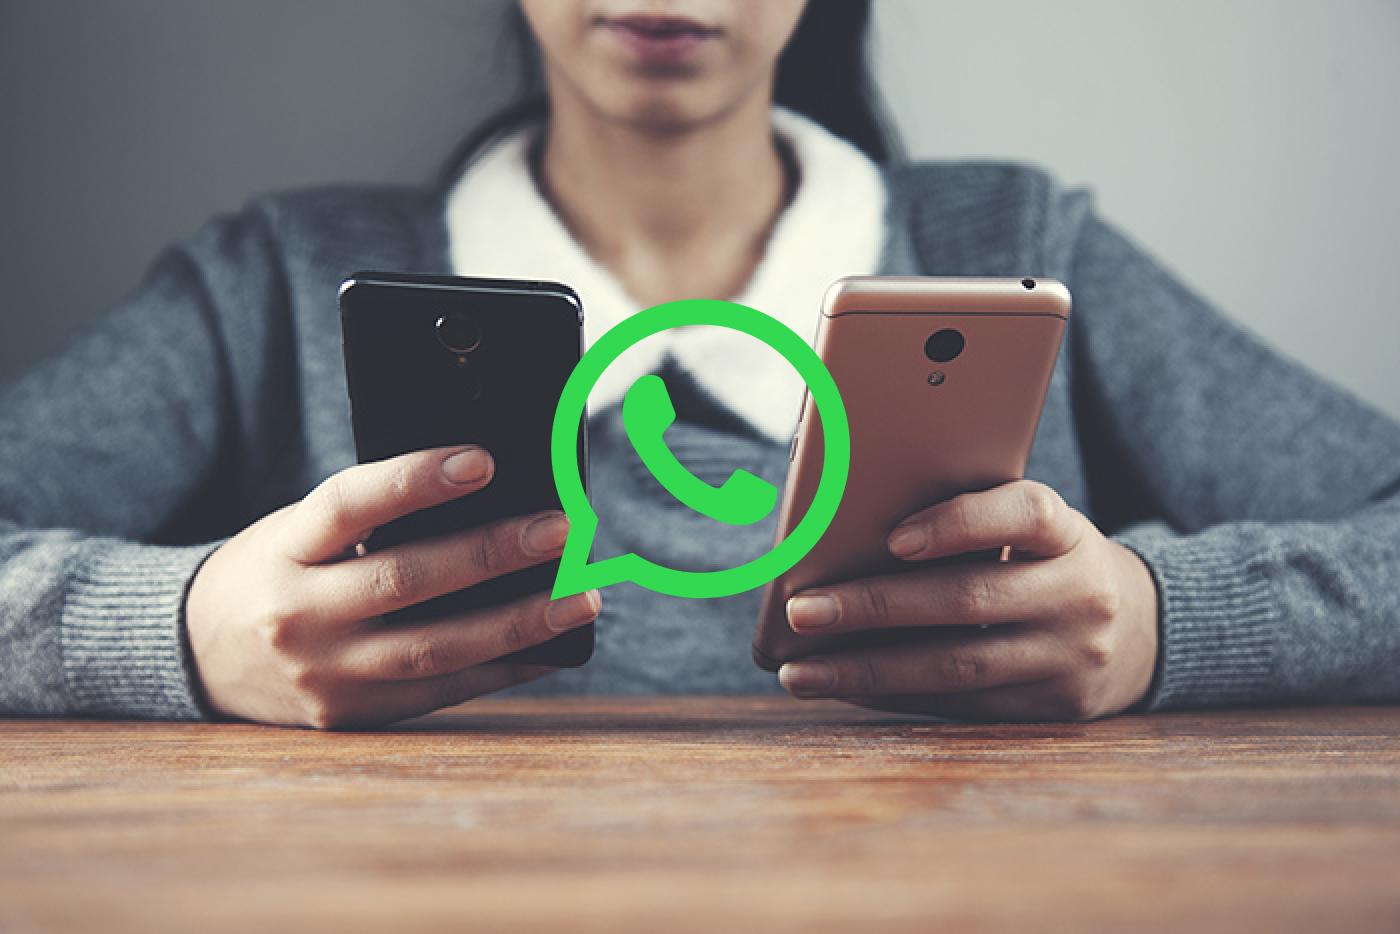 How to Use WhatsApp on Two Phones with Same Number